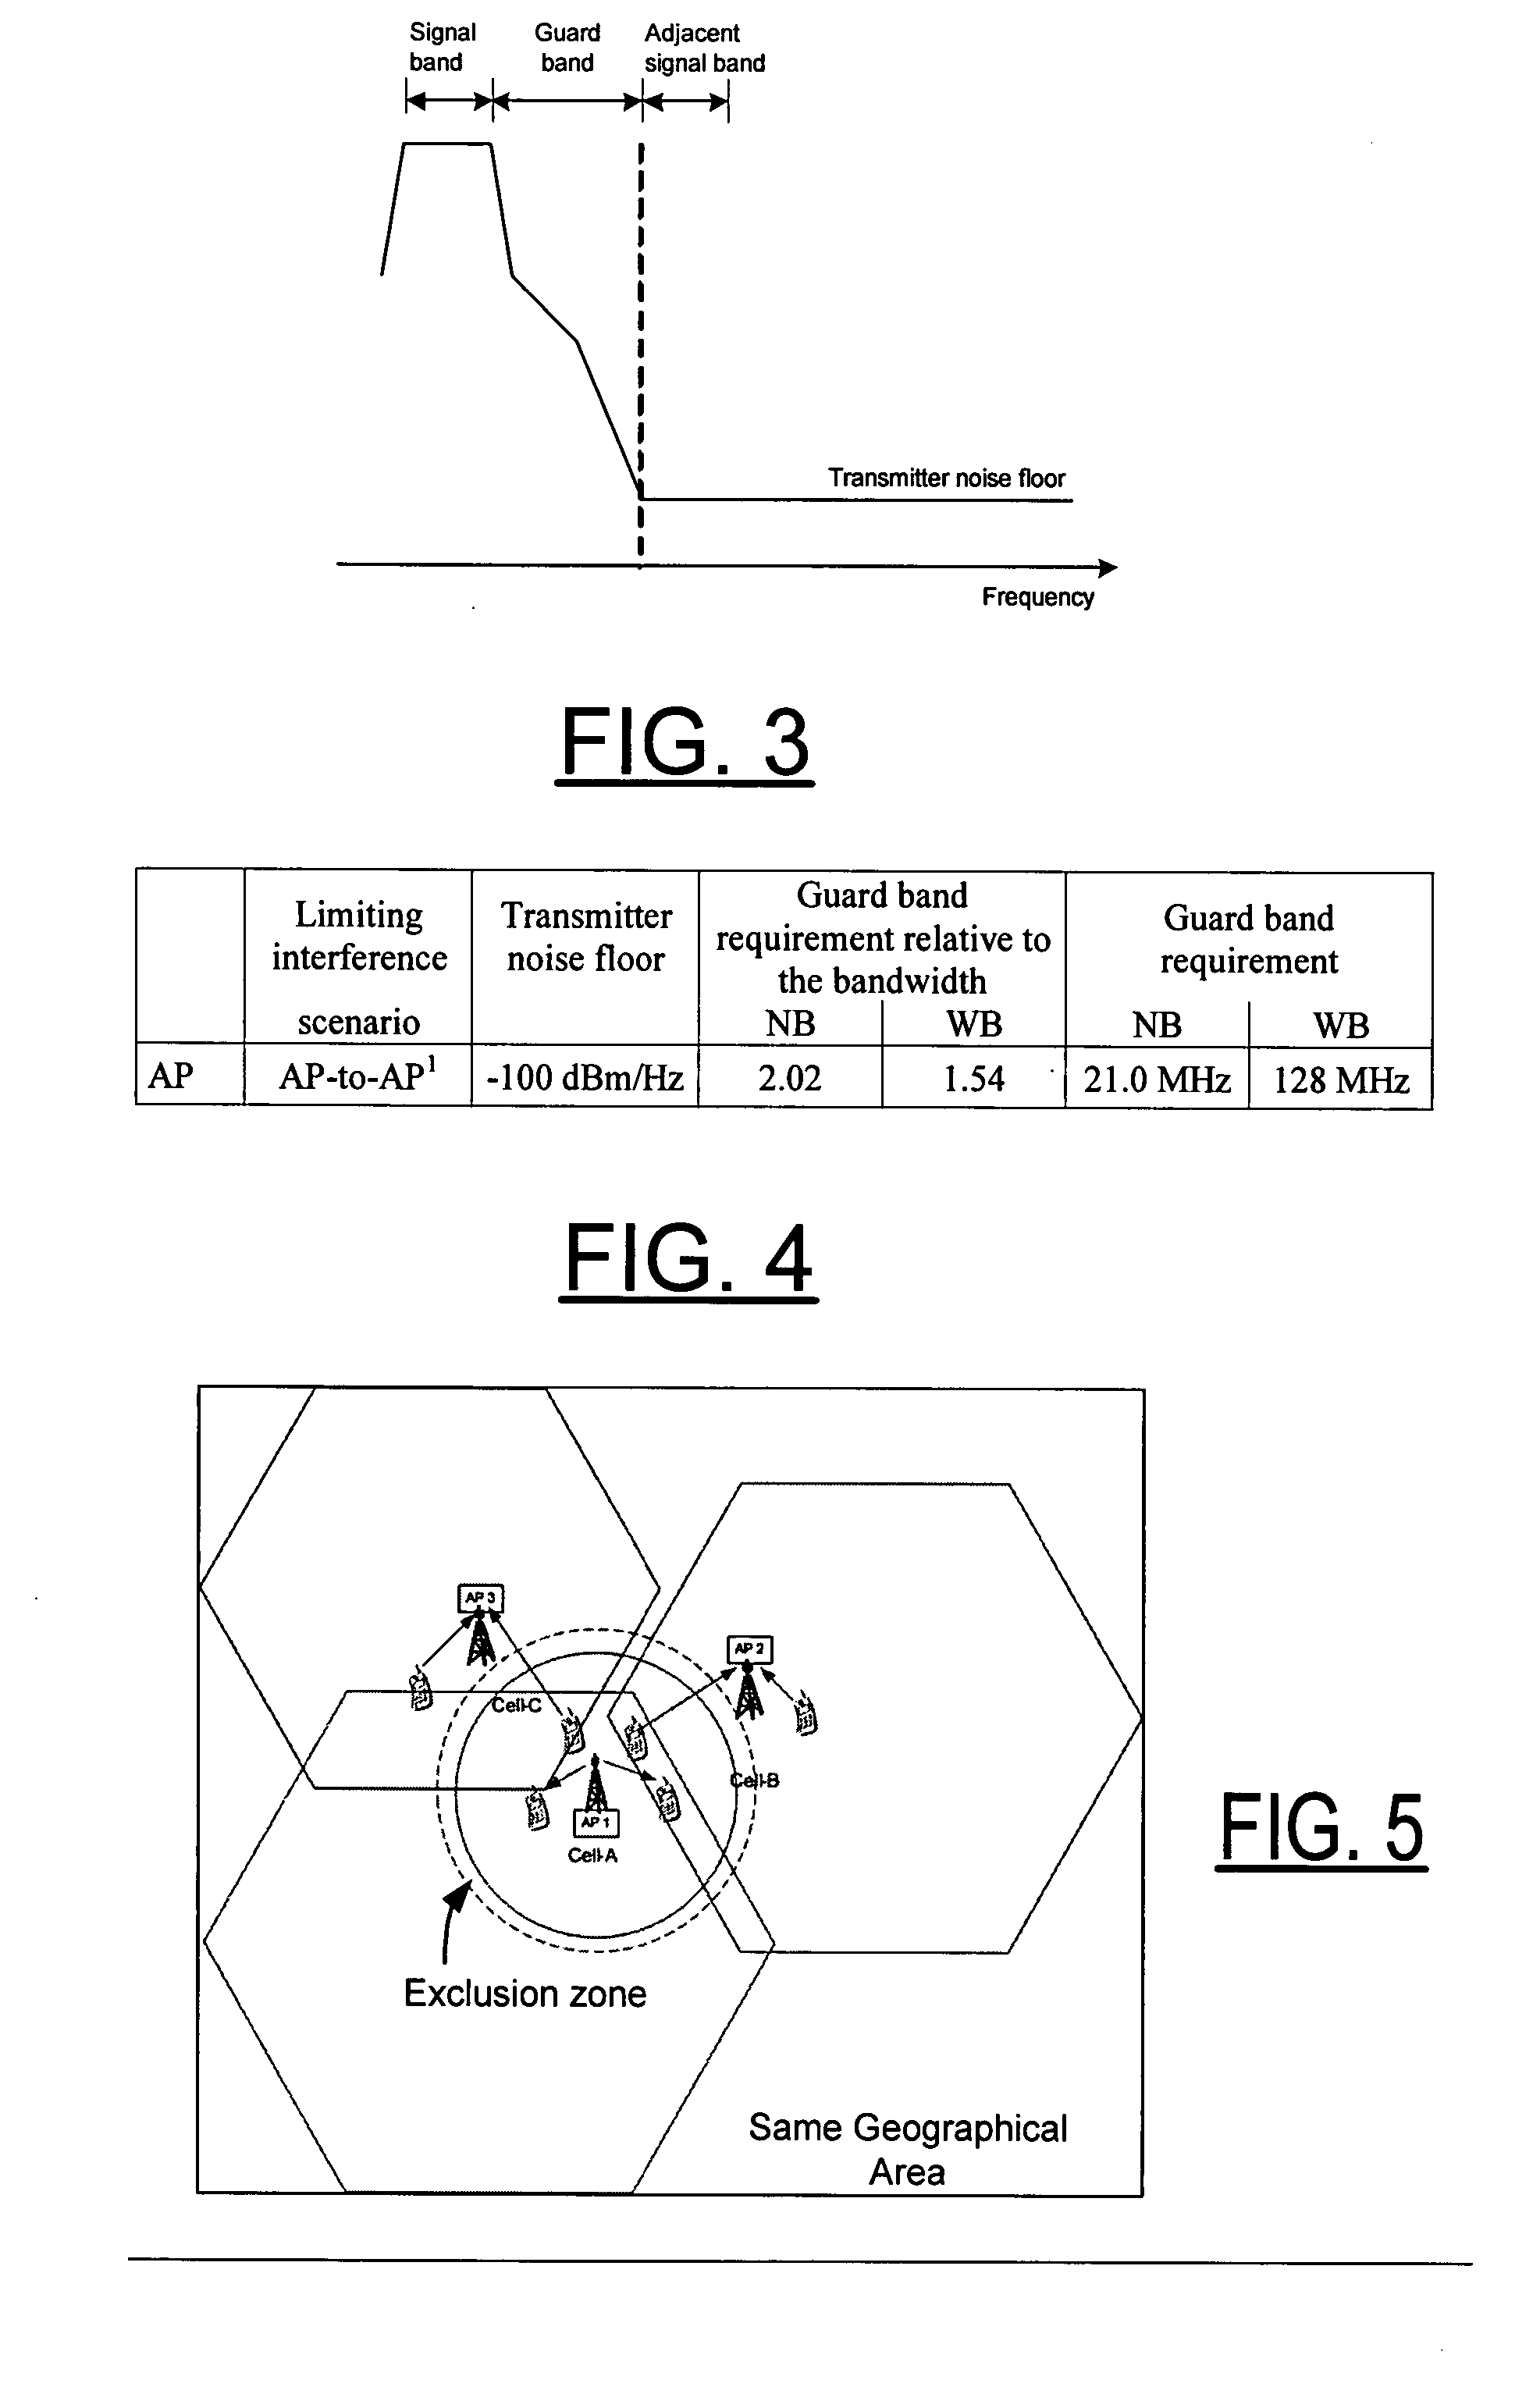 Method and apparatus for reducing the guard band between wireless communication systems operating in the same geographical area